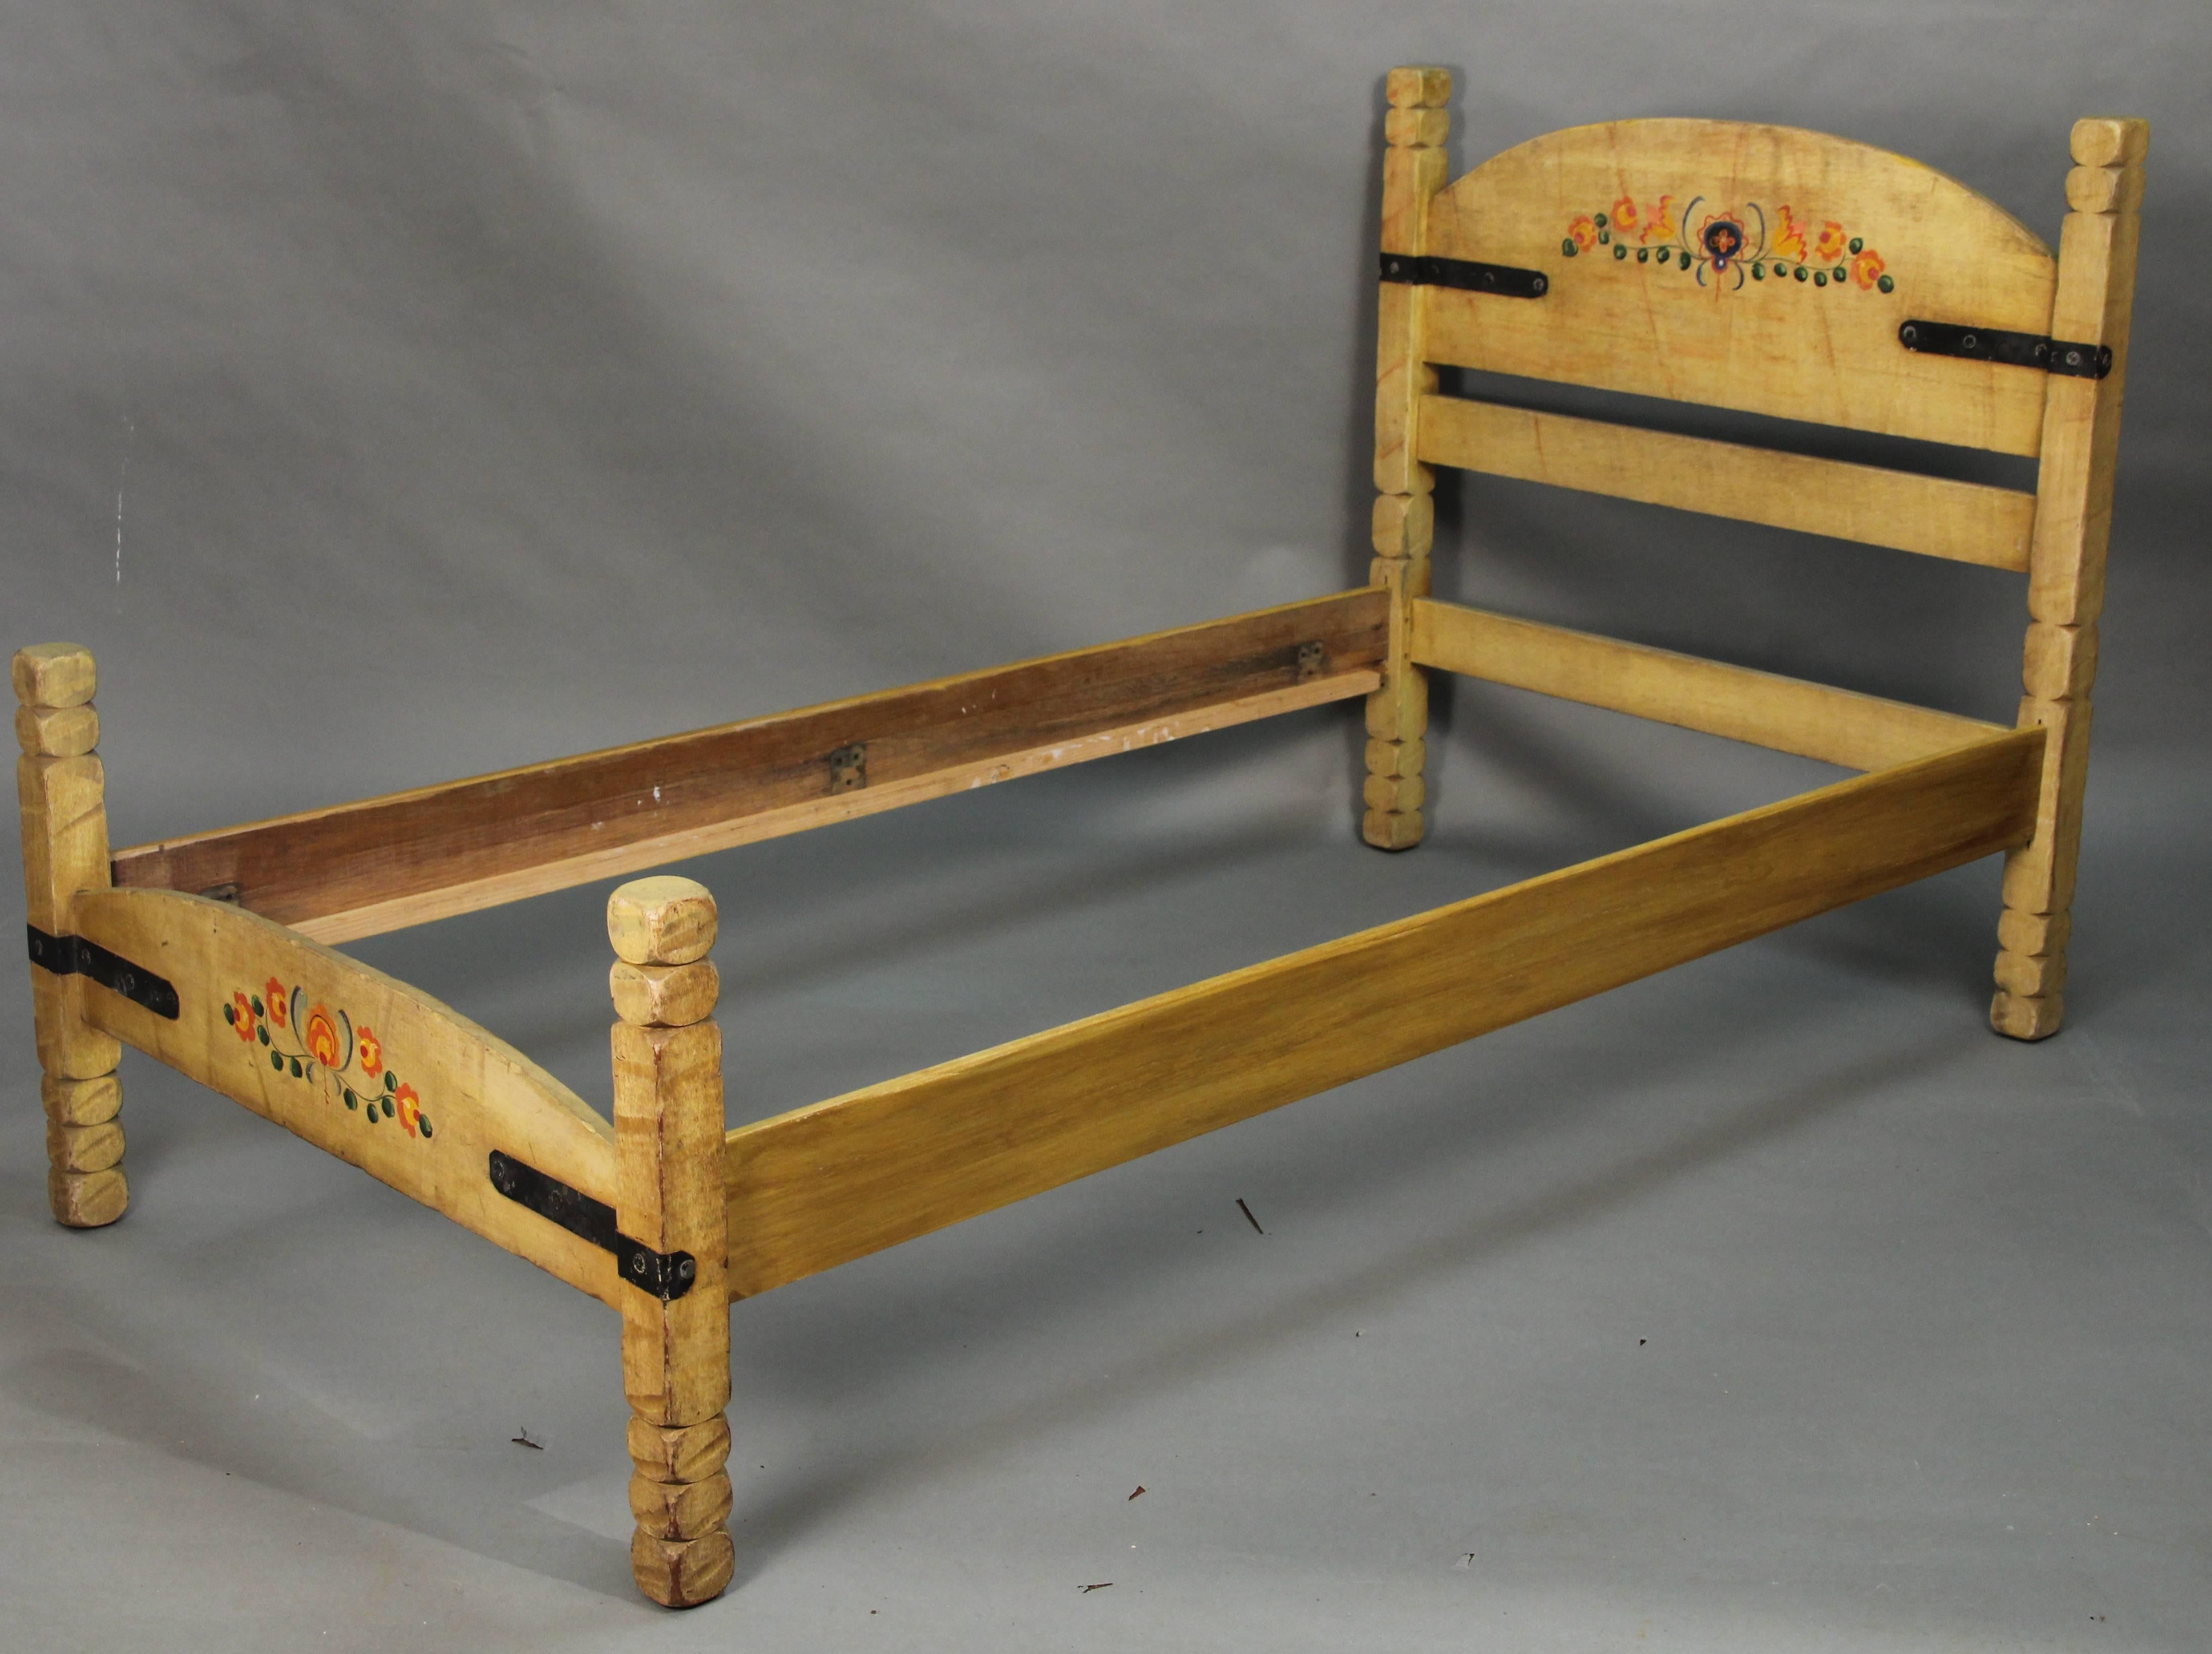 Attractive single twin bed frame made by the Monterey Company in Los Angeles.